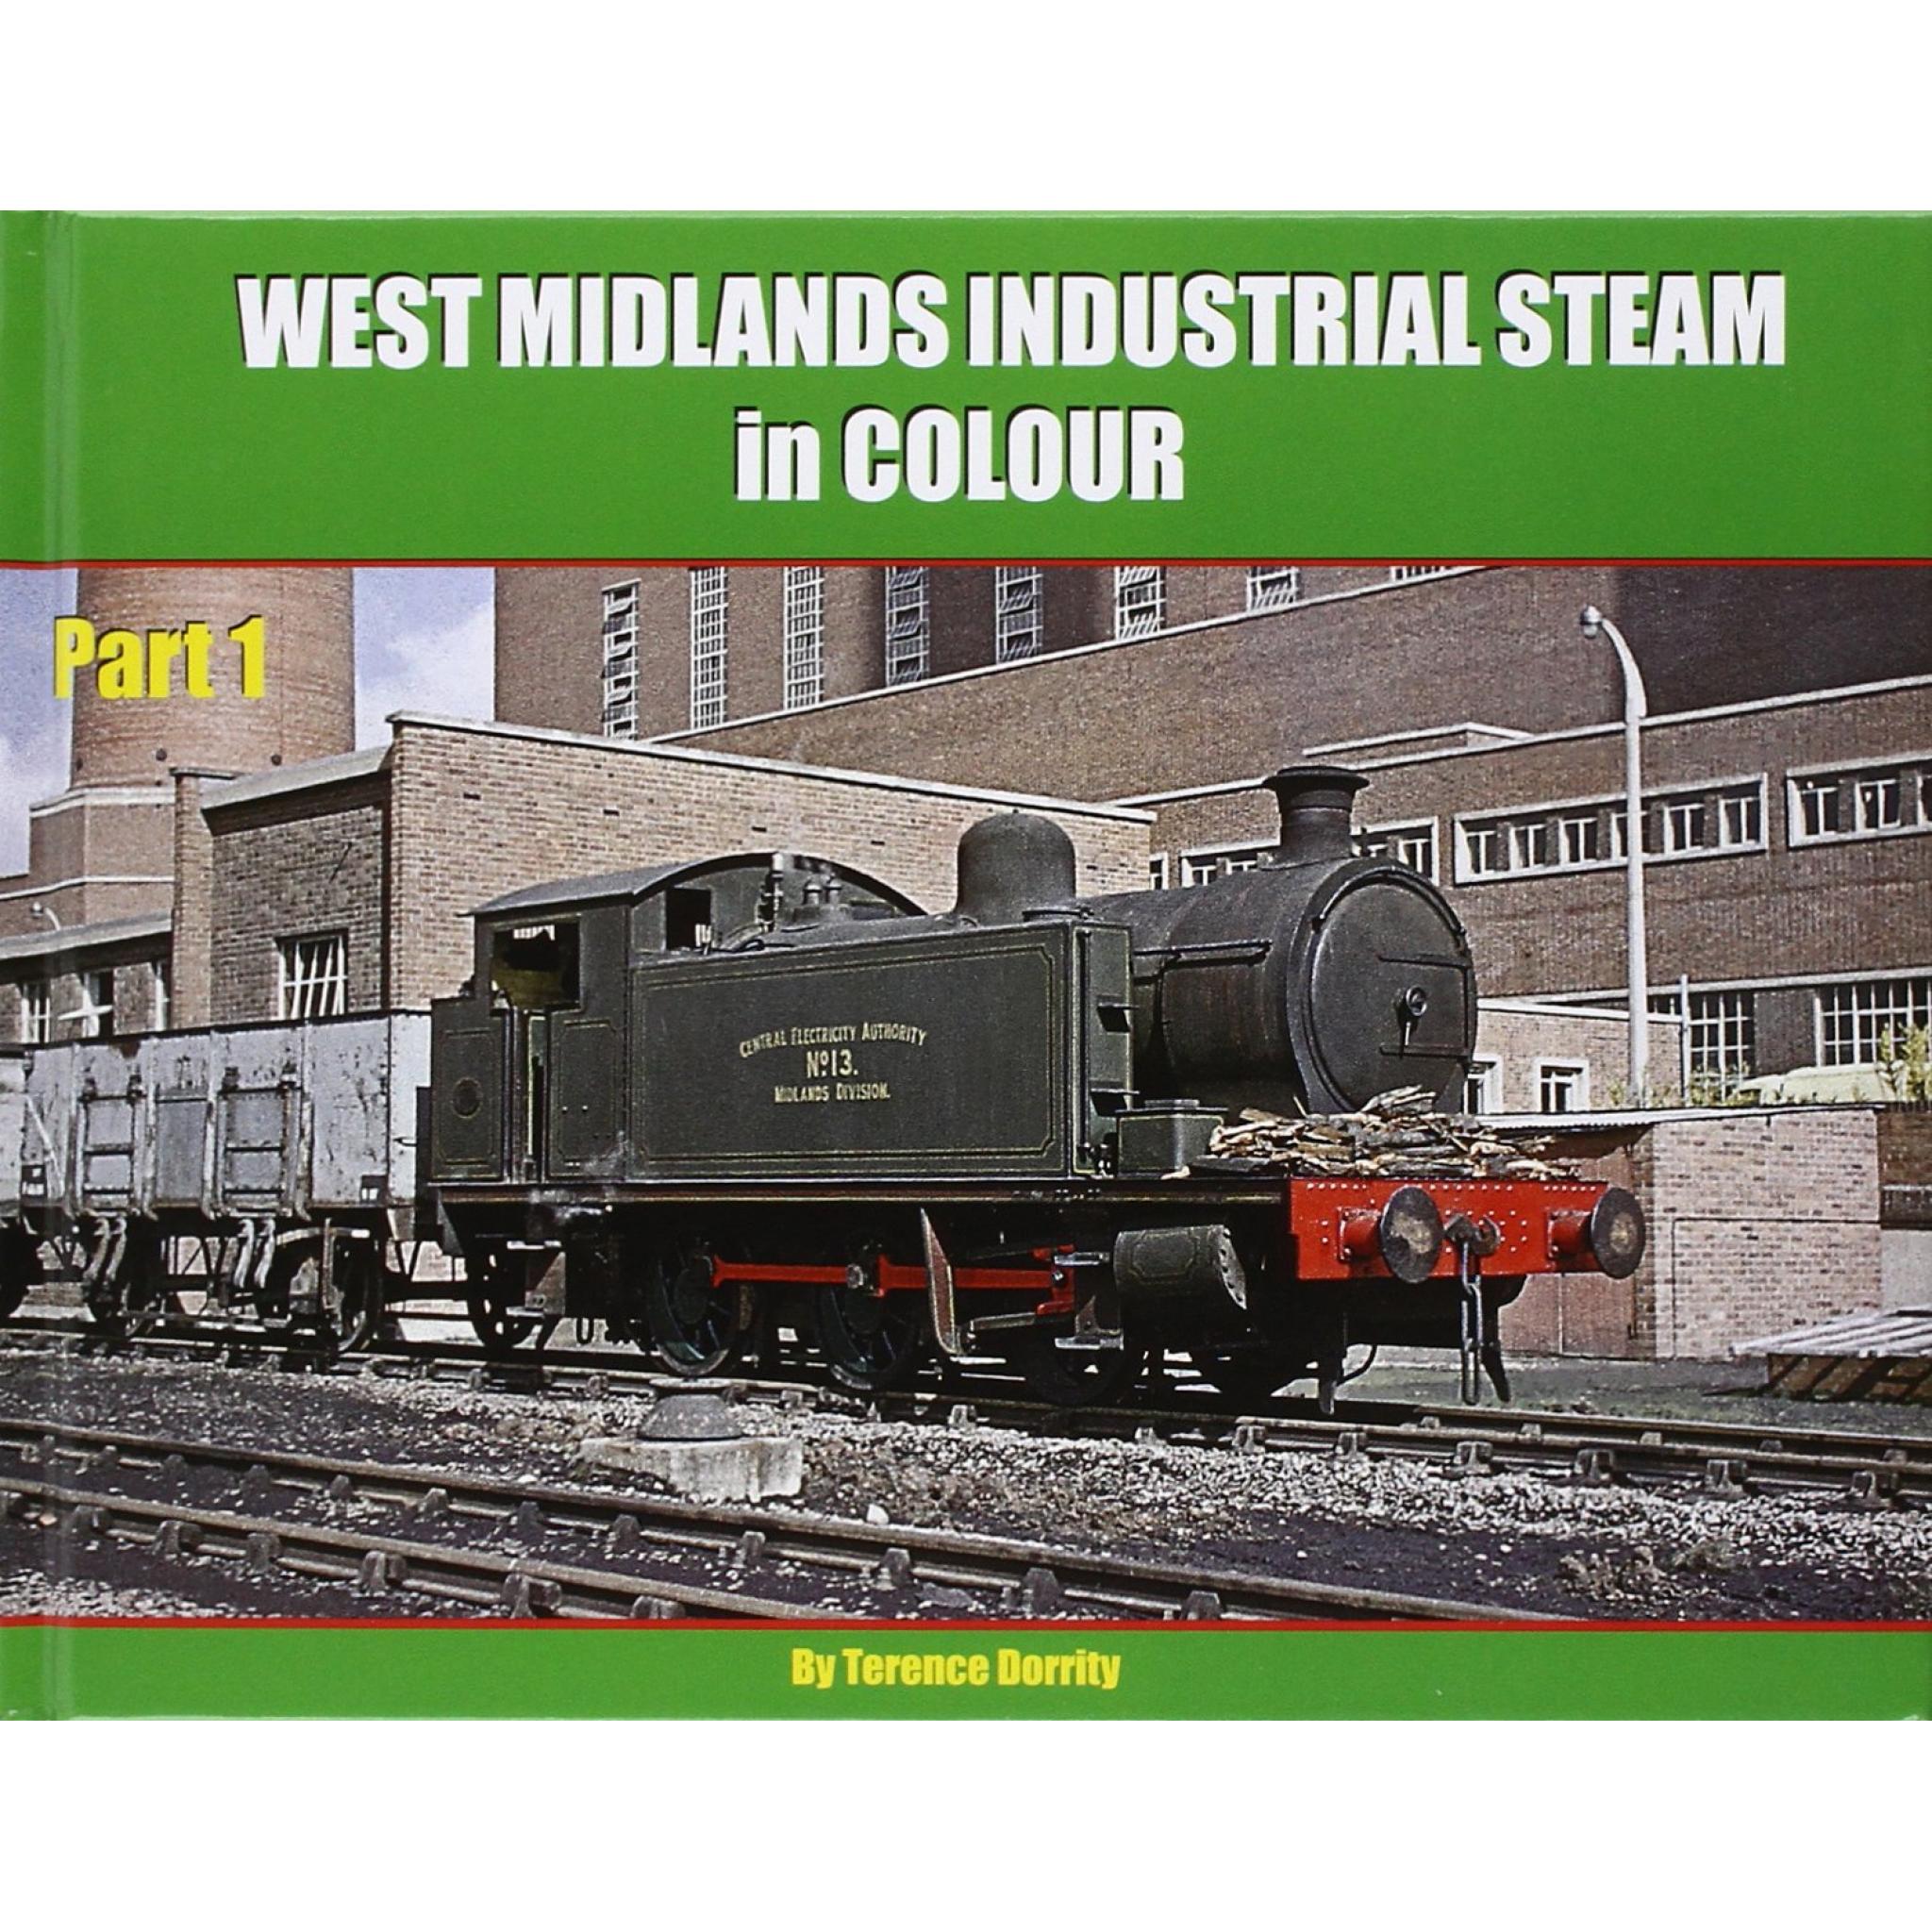 WEST MIDLANDS INDUSTRIAL STEAM IN COLOUR